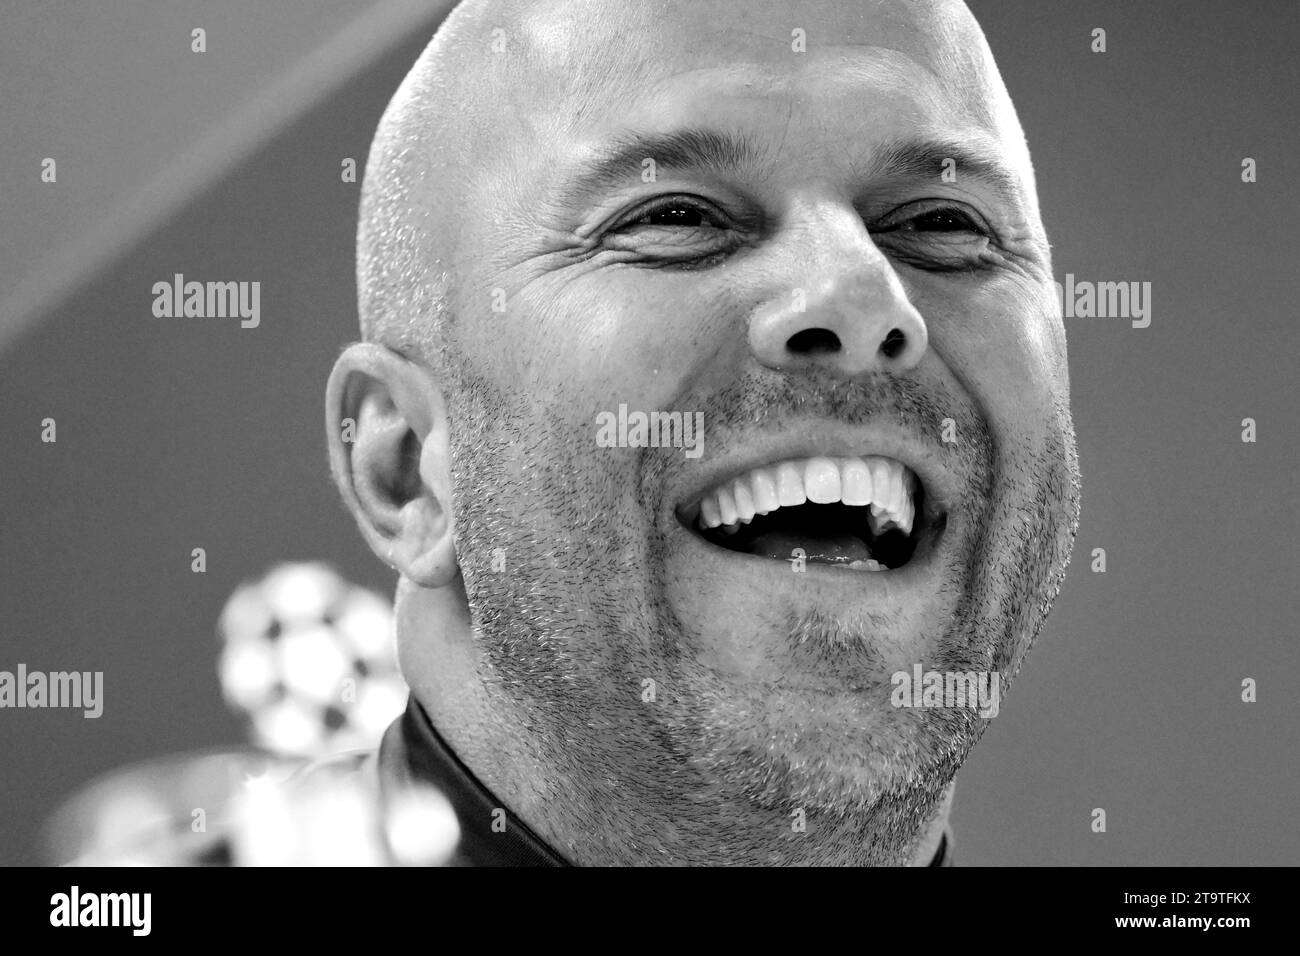 ROTTERDAM - Coach Arne Slot of Feyenoord during the MD-1 press conference prior to the UEFA Champions League match against Atletico Madrid at Feyenoord Stadium de Kuip on November 27, 2023 in Rotterdam, the Netherlands. (Converted from color to b/w) ANP OLAF KRAAK Stock Photo